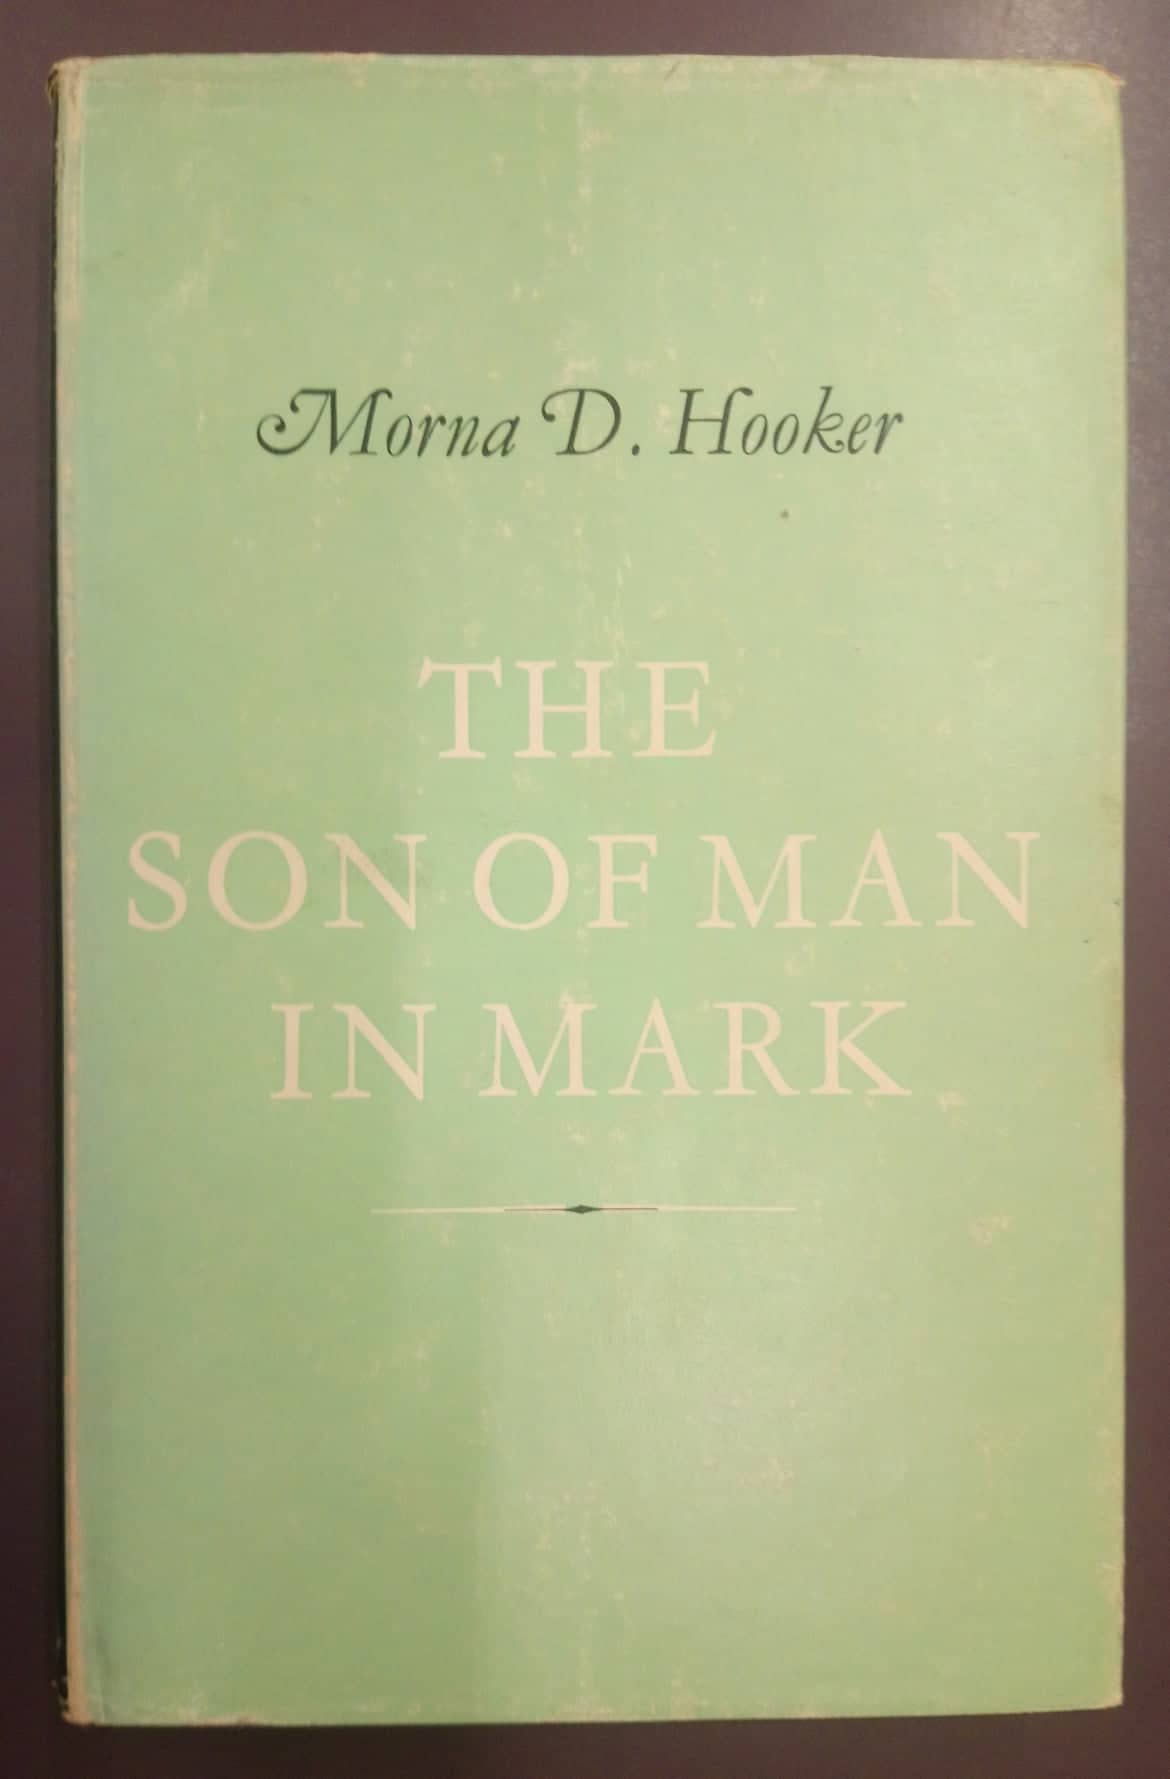 The Son of Man in Mark